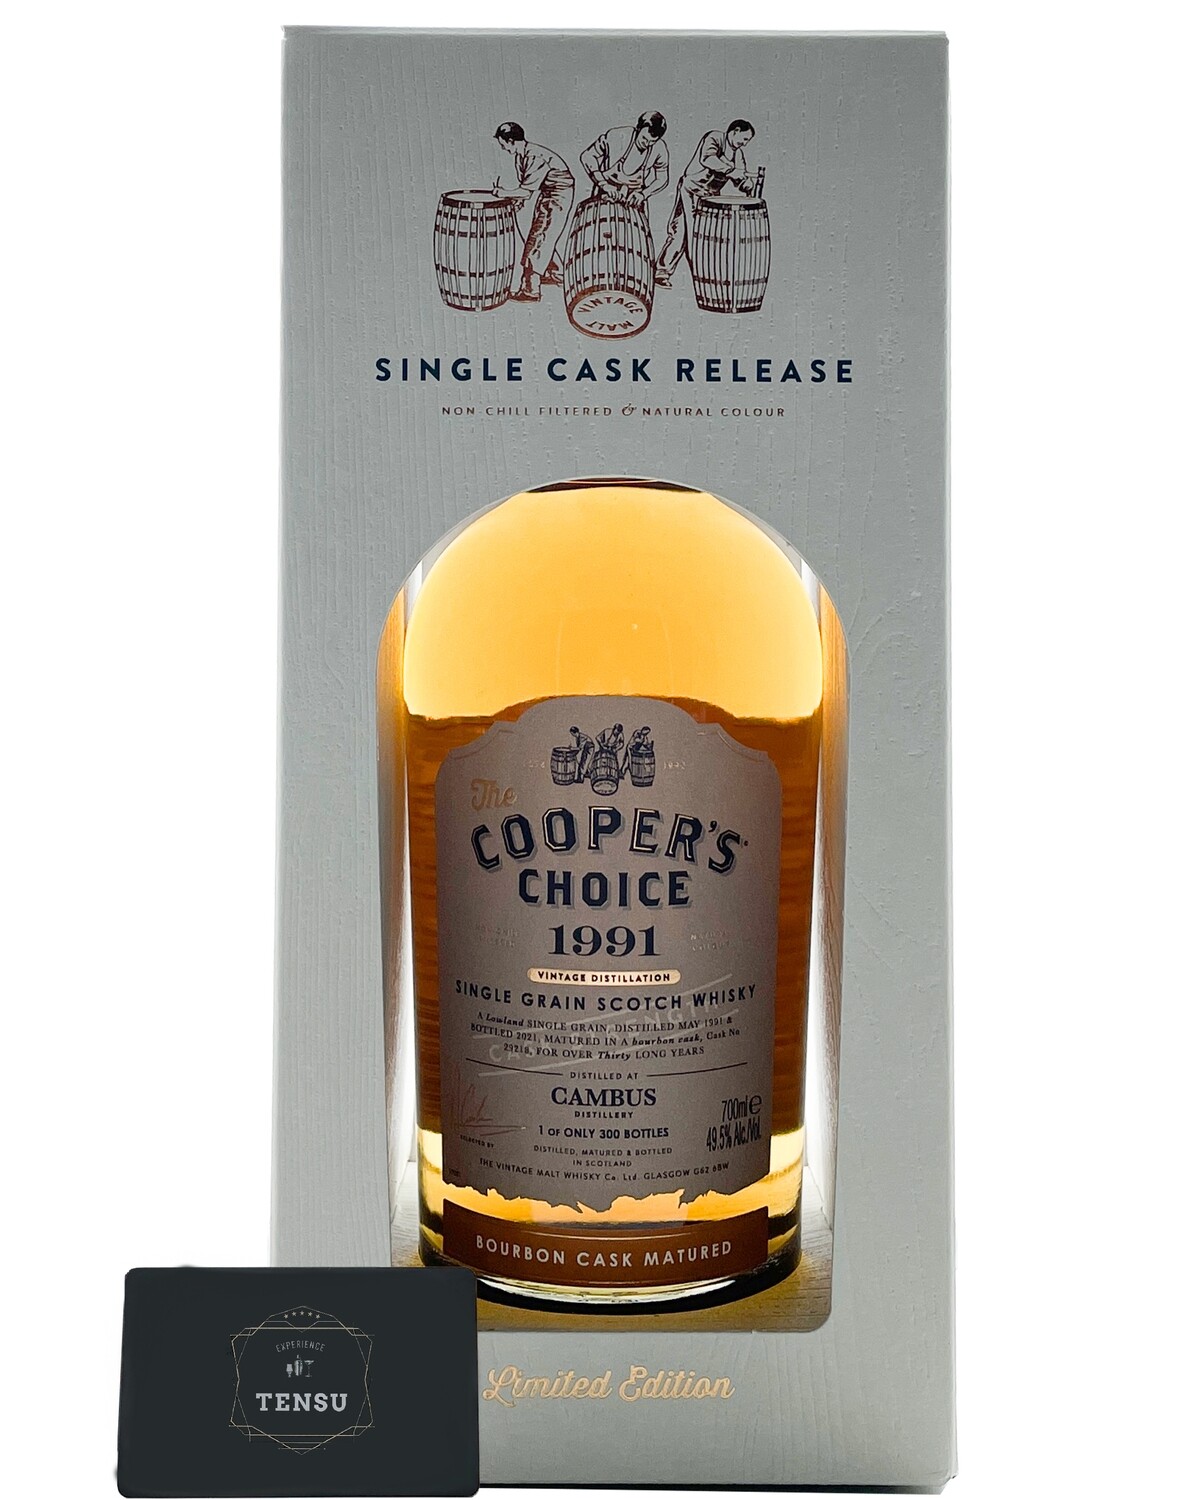 Cambus 30 Years Old (1991-2021) Bourbon Cask 49.5 "Cooper's Choice"